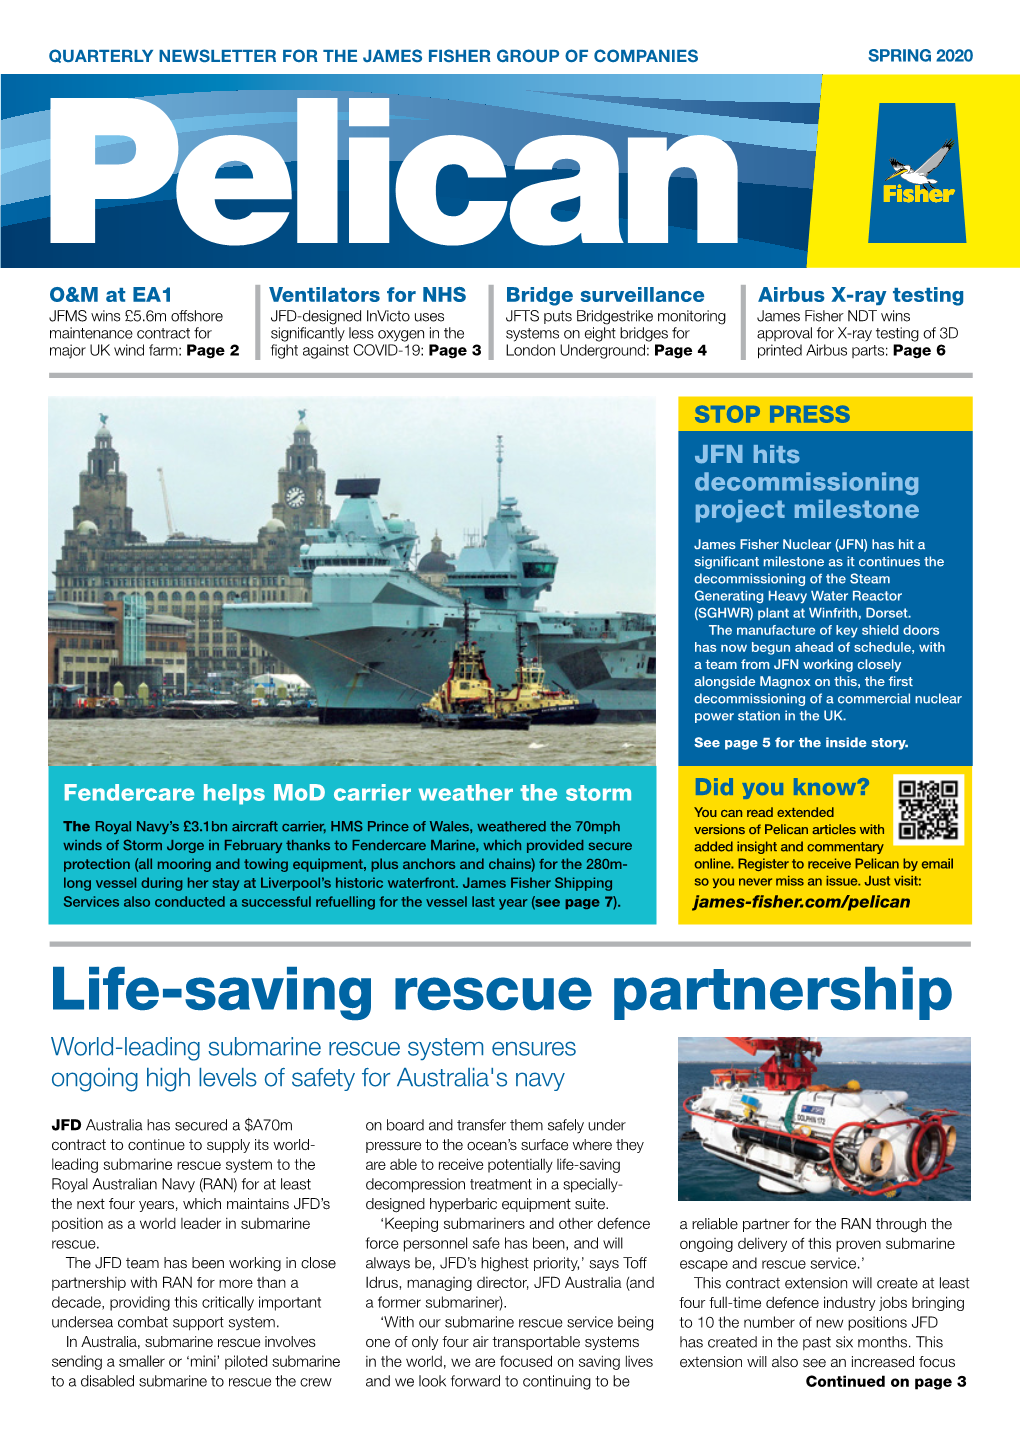 Life-Saving Rescue Partnership World-Leading Submarine Rescue System Ensures Ongoing High Levels of Safety for Australia's Navy